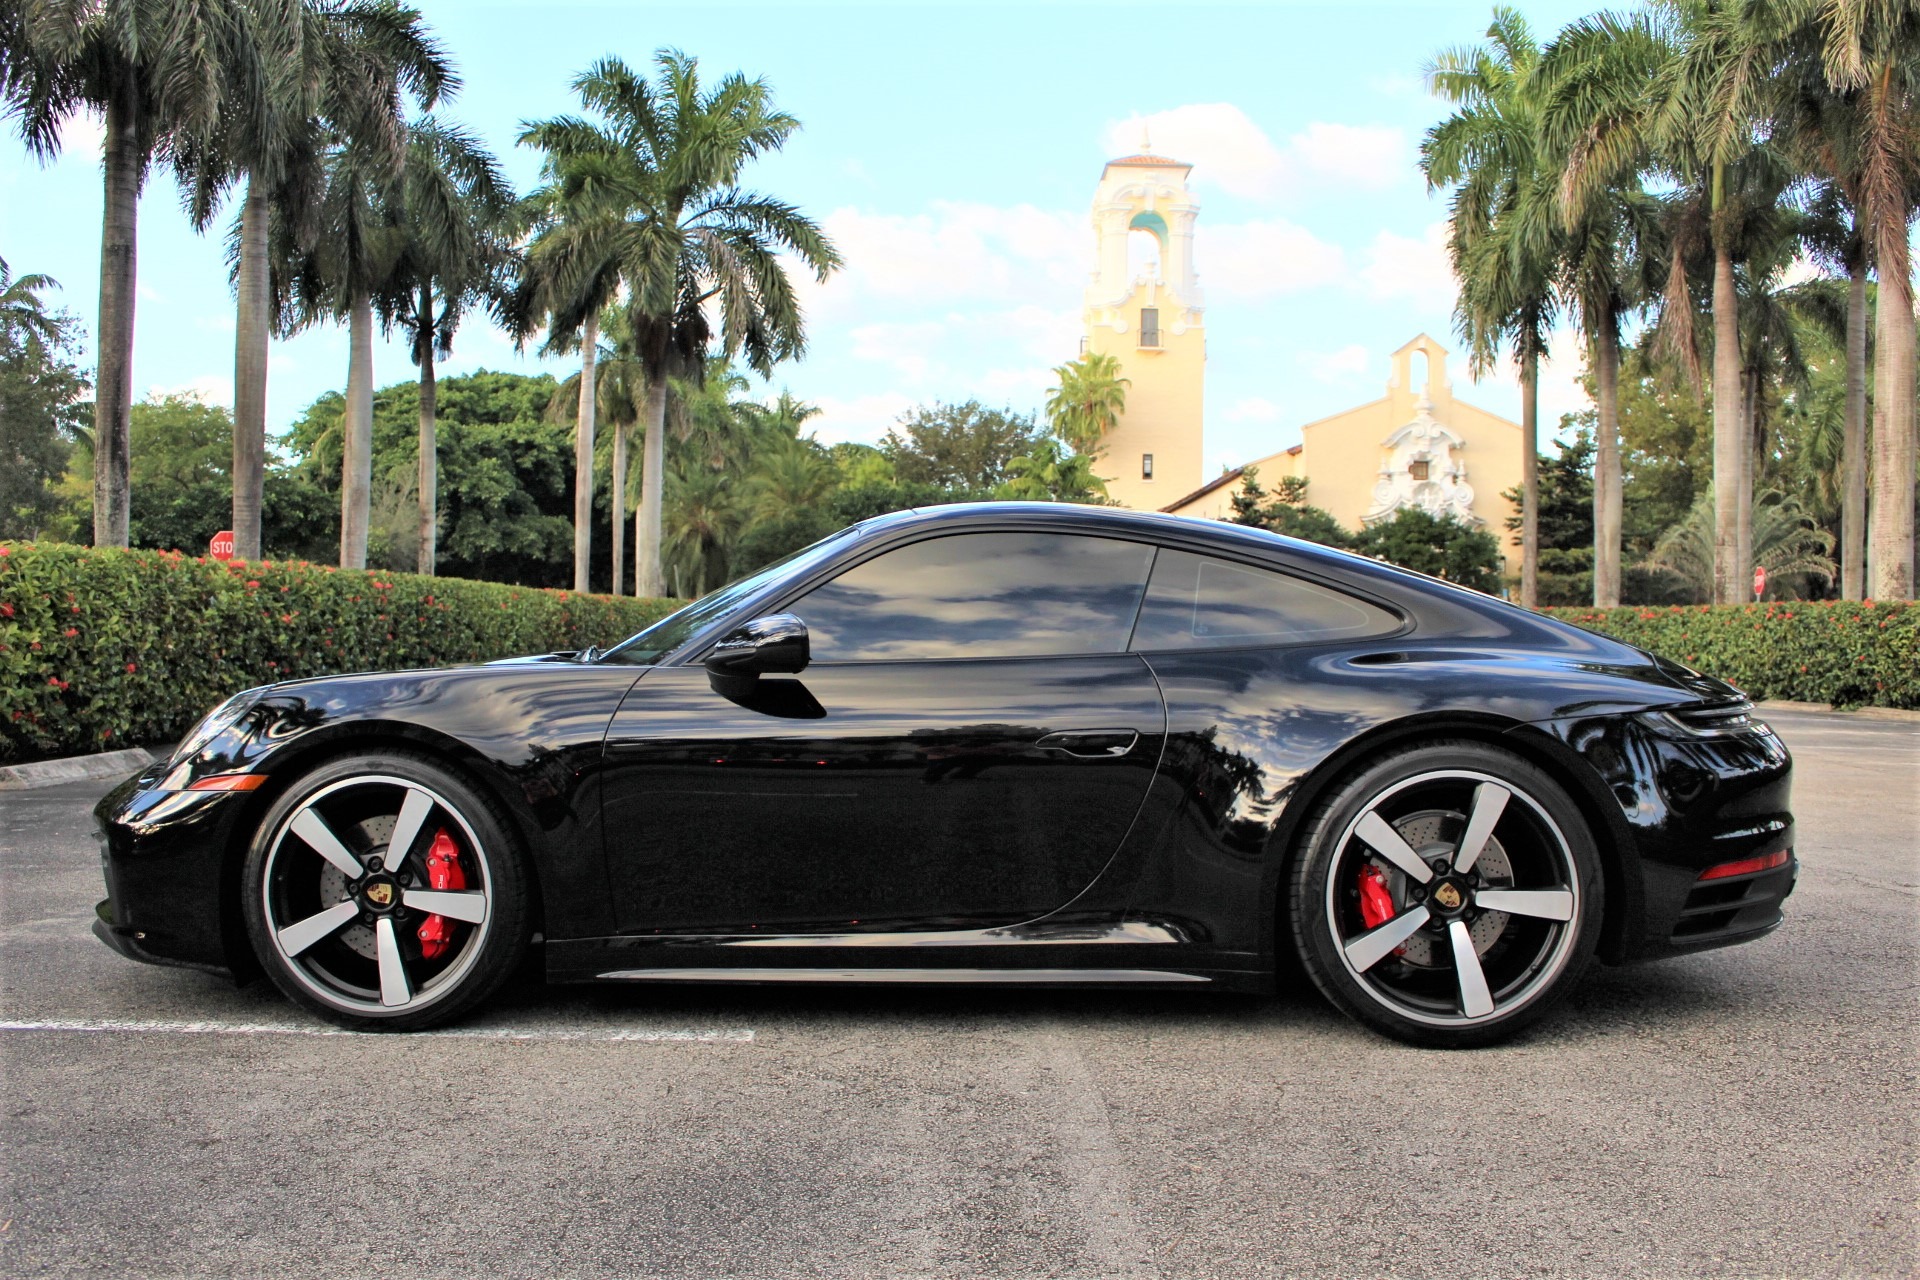 Used 2020 Porsche 911 Carrera 4S for sale Sold at The Gables Sports Cars in Miami FL 33146 4